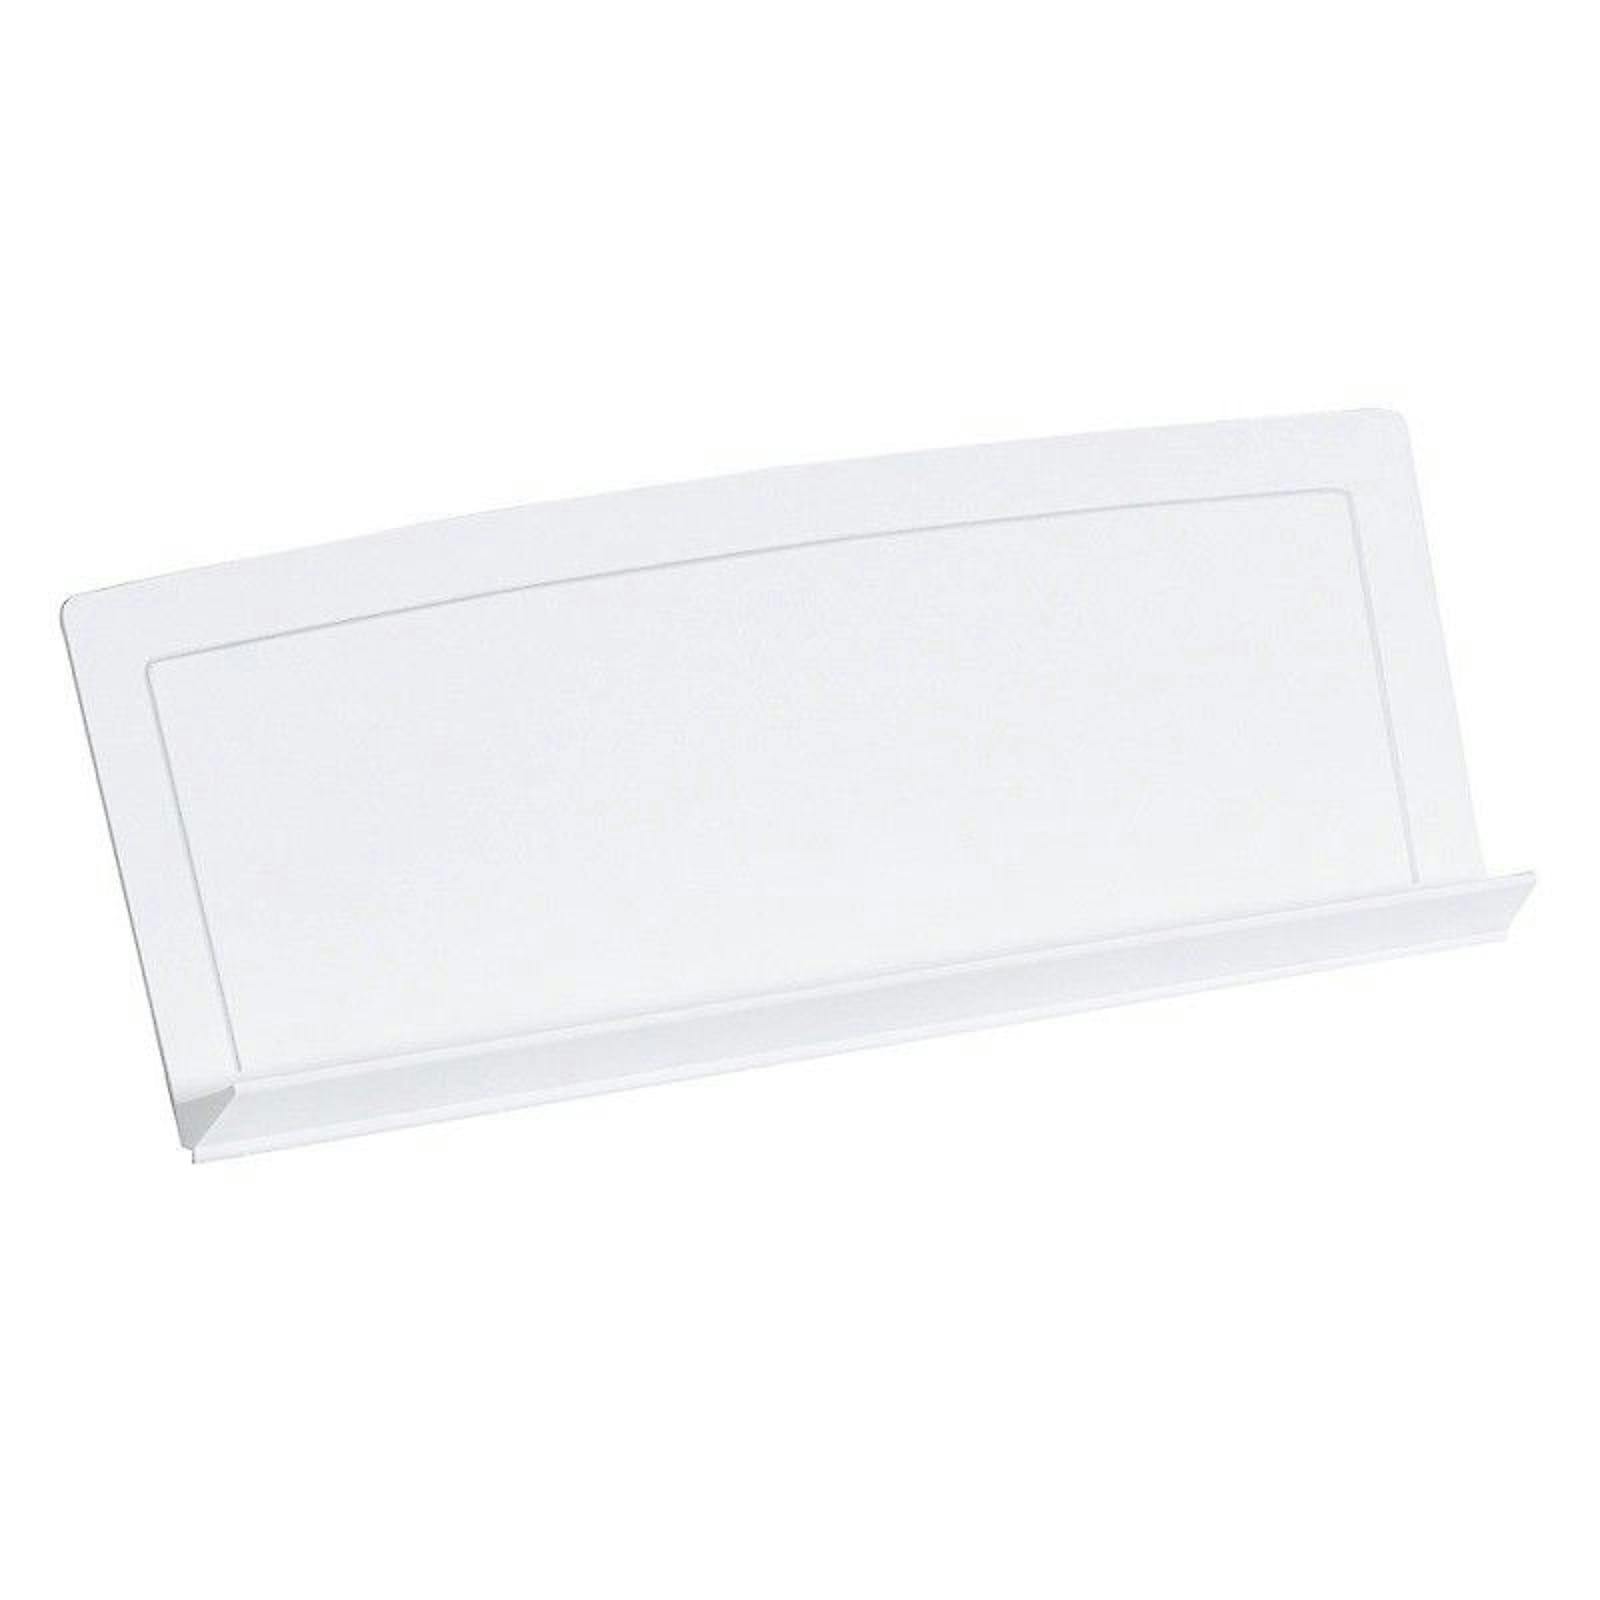 Yamaha Replacement Music Rest for P Series Keyboards in White